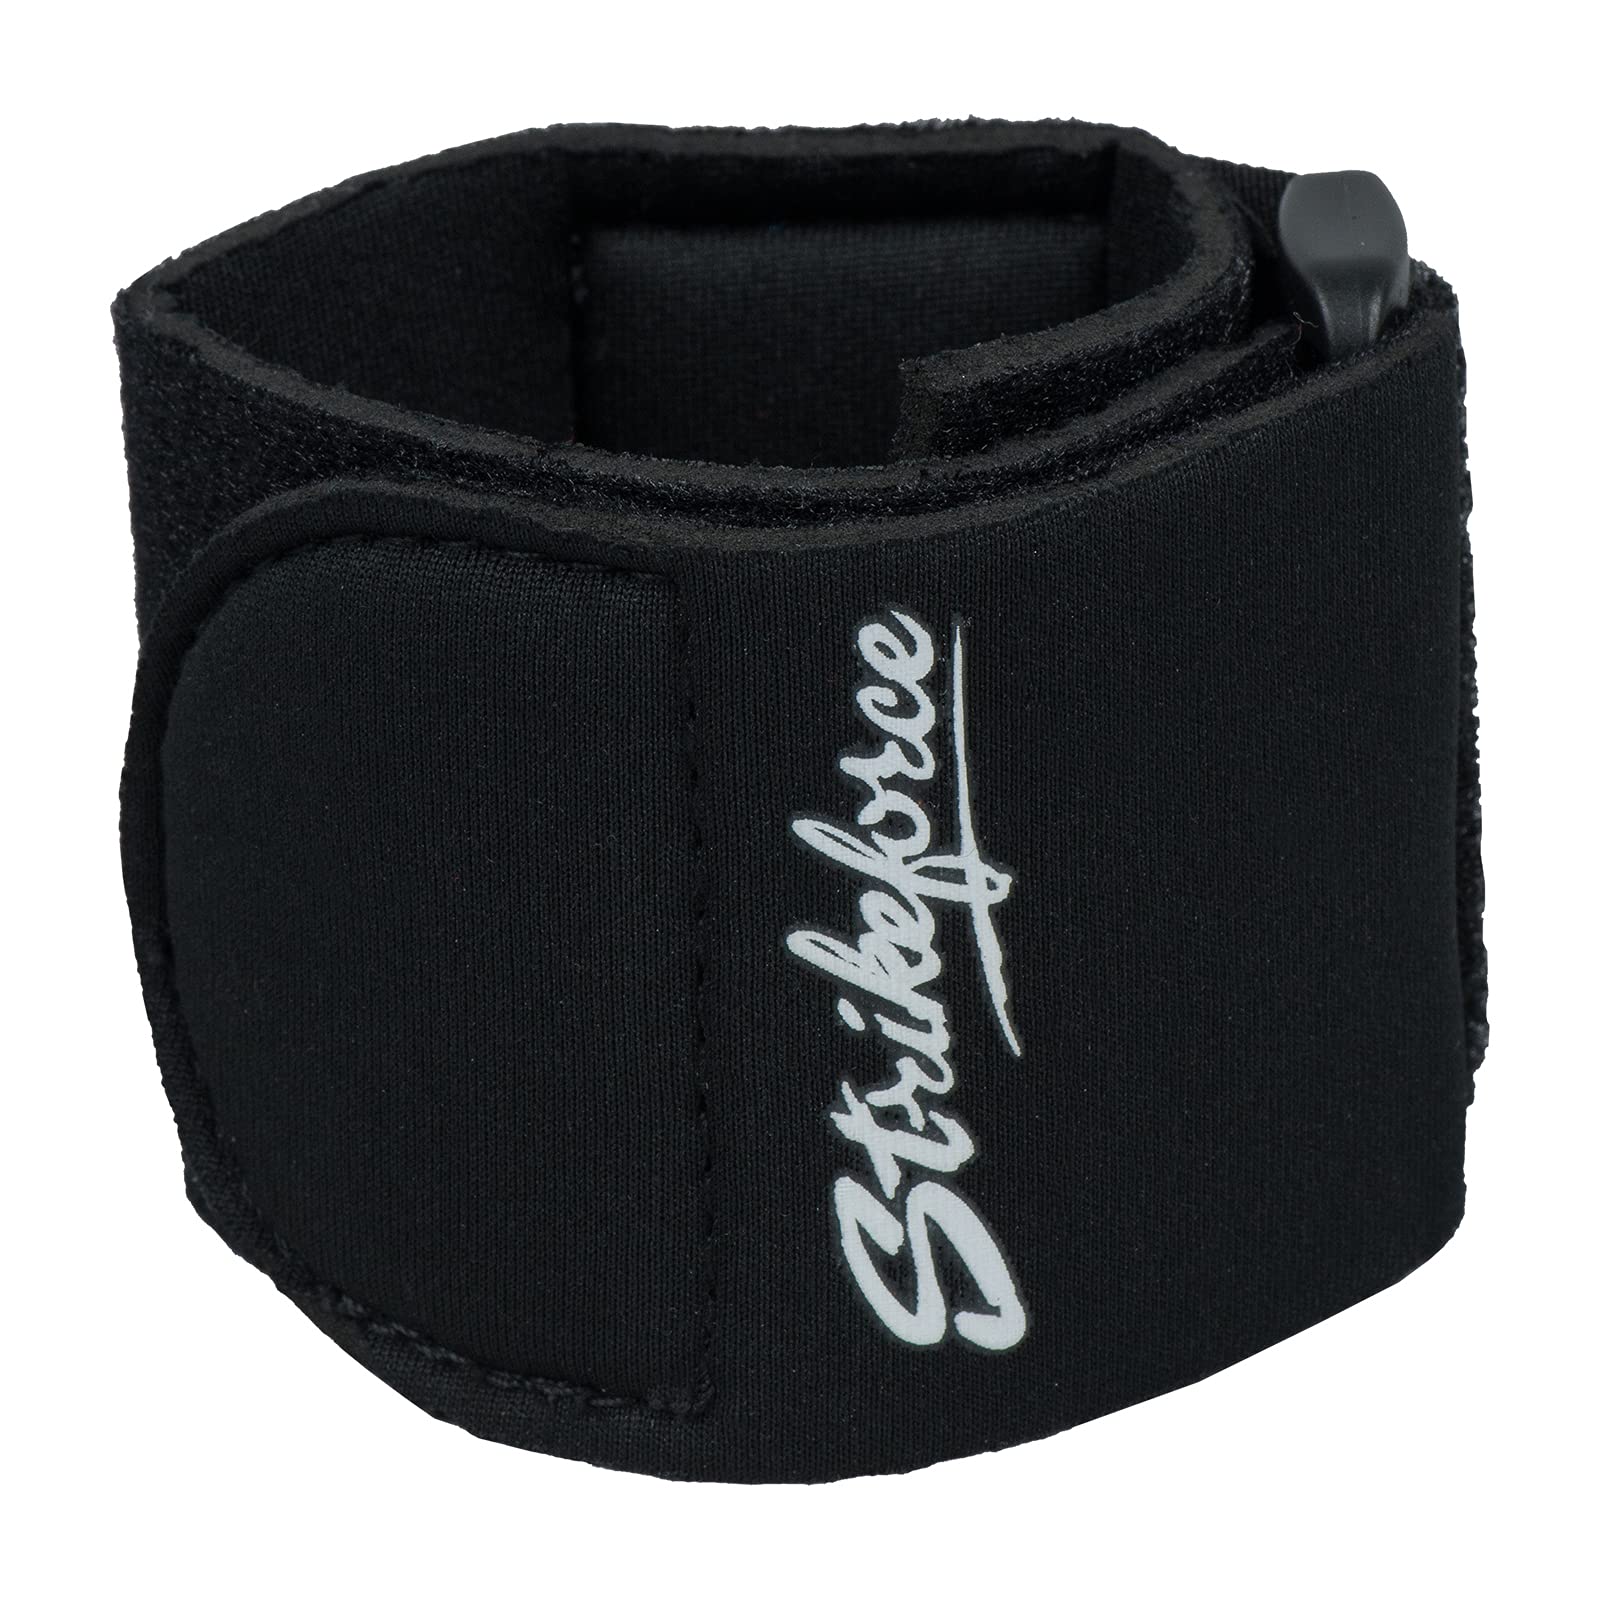 KR Strikeforce Strikeforce Bowling Flexx Wrist Support for Right or Left Hand - One Size Fits All